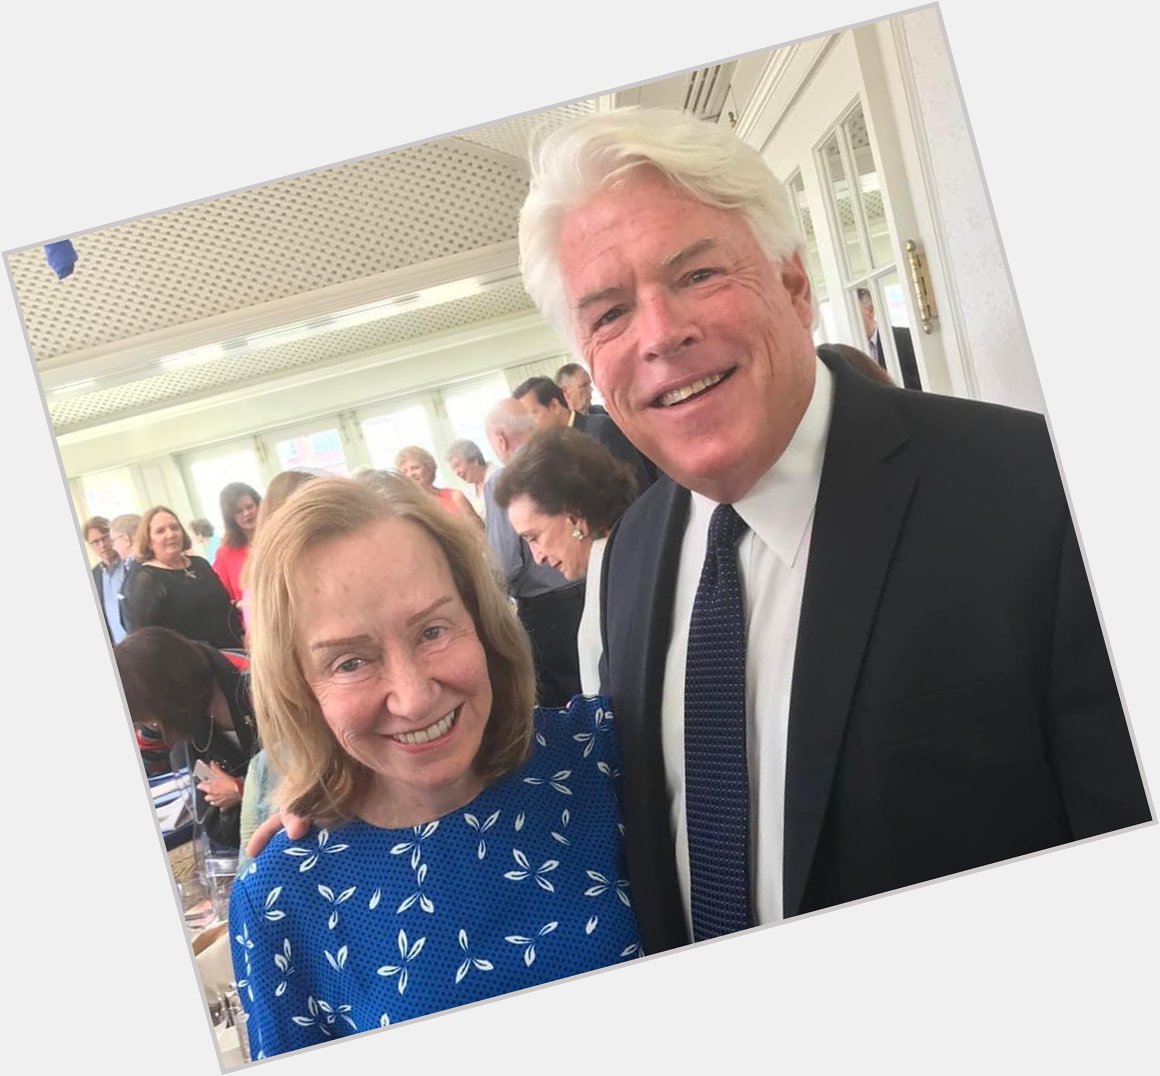 Happy 80th Birthday to my friend Doris Kearns Goodwin, the greatest historian of our time. 